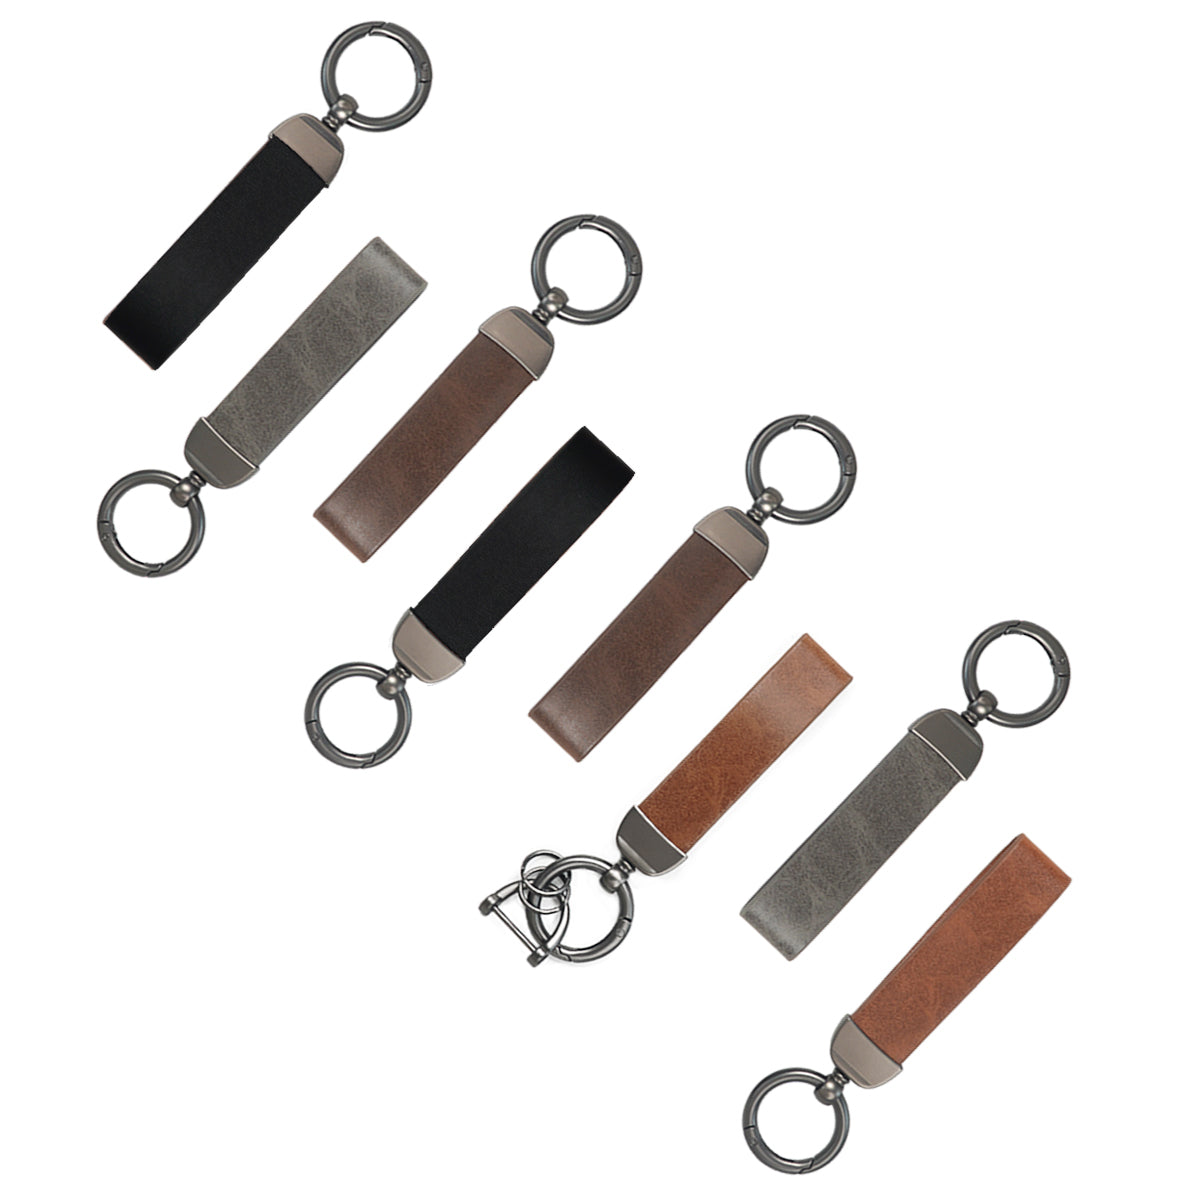 Ortur Leather Keychain for Laser Engraving (8 pcs)